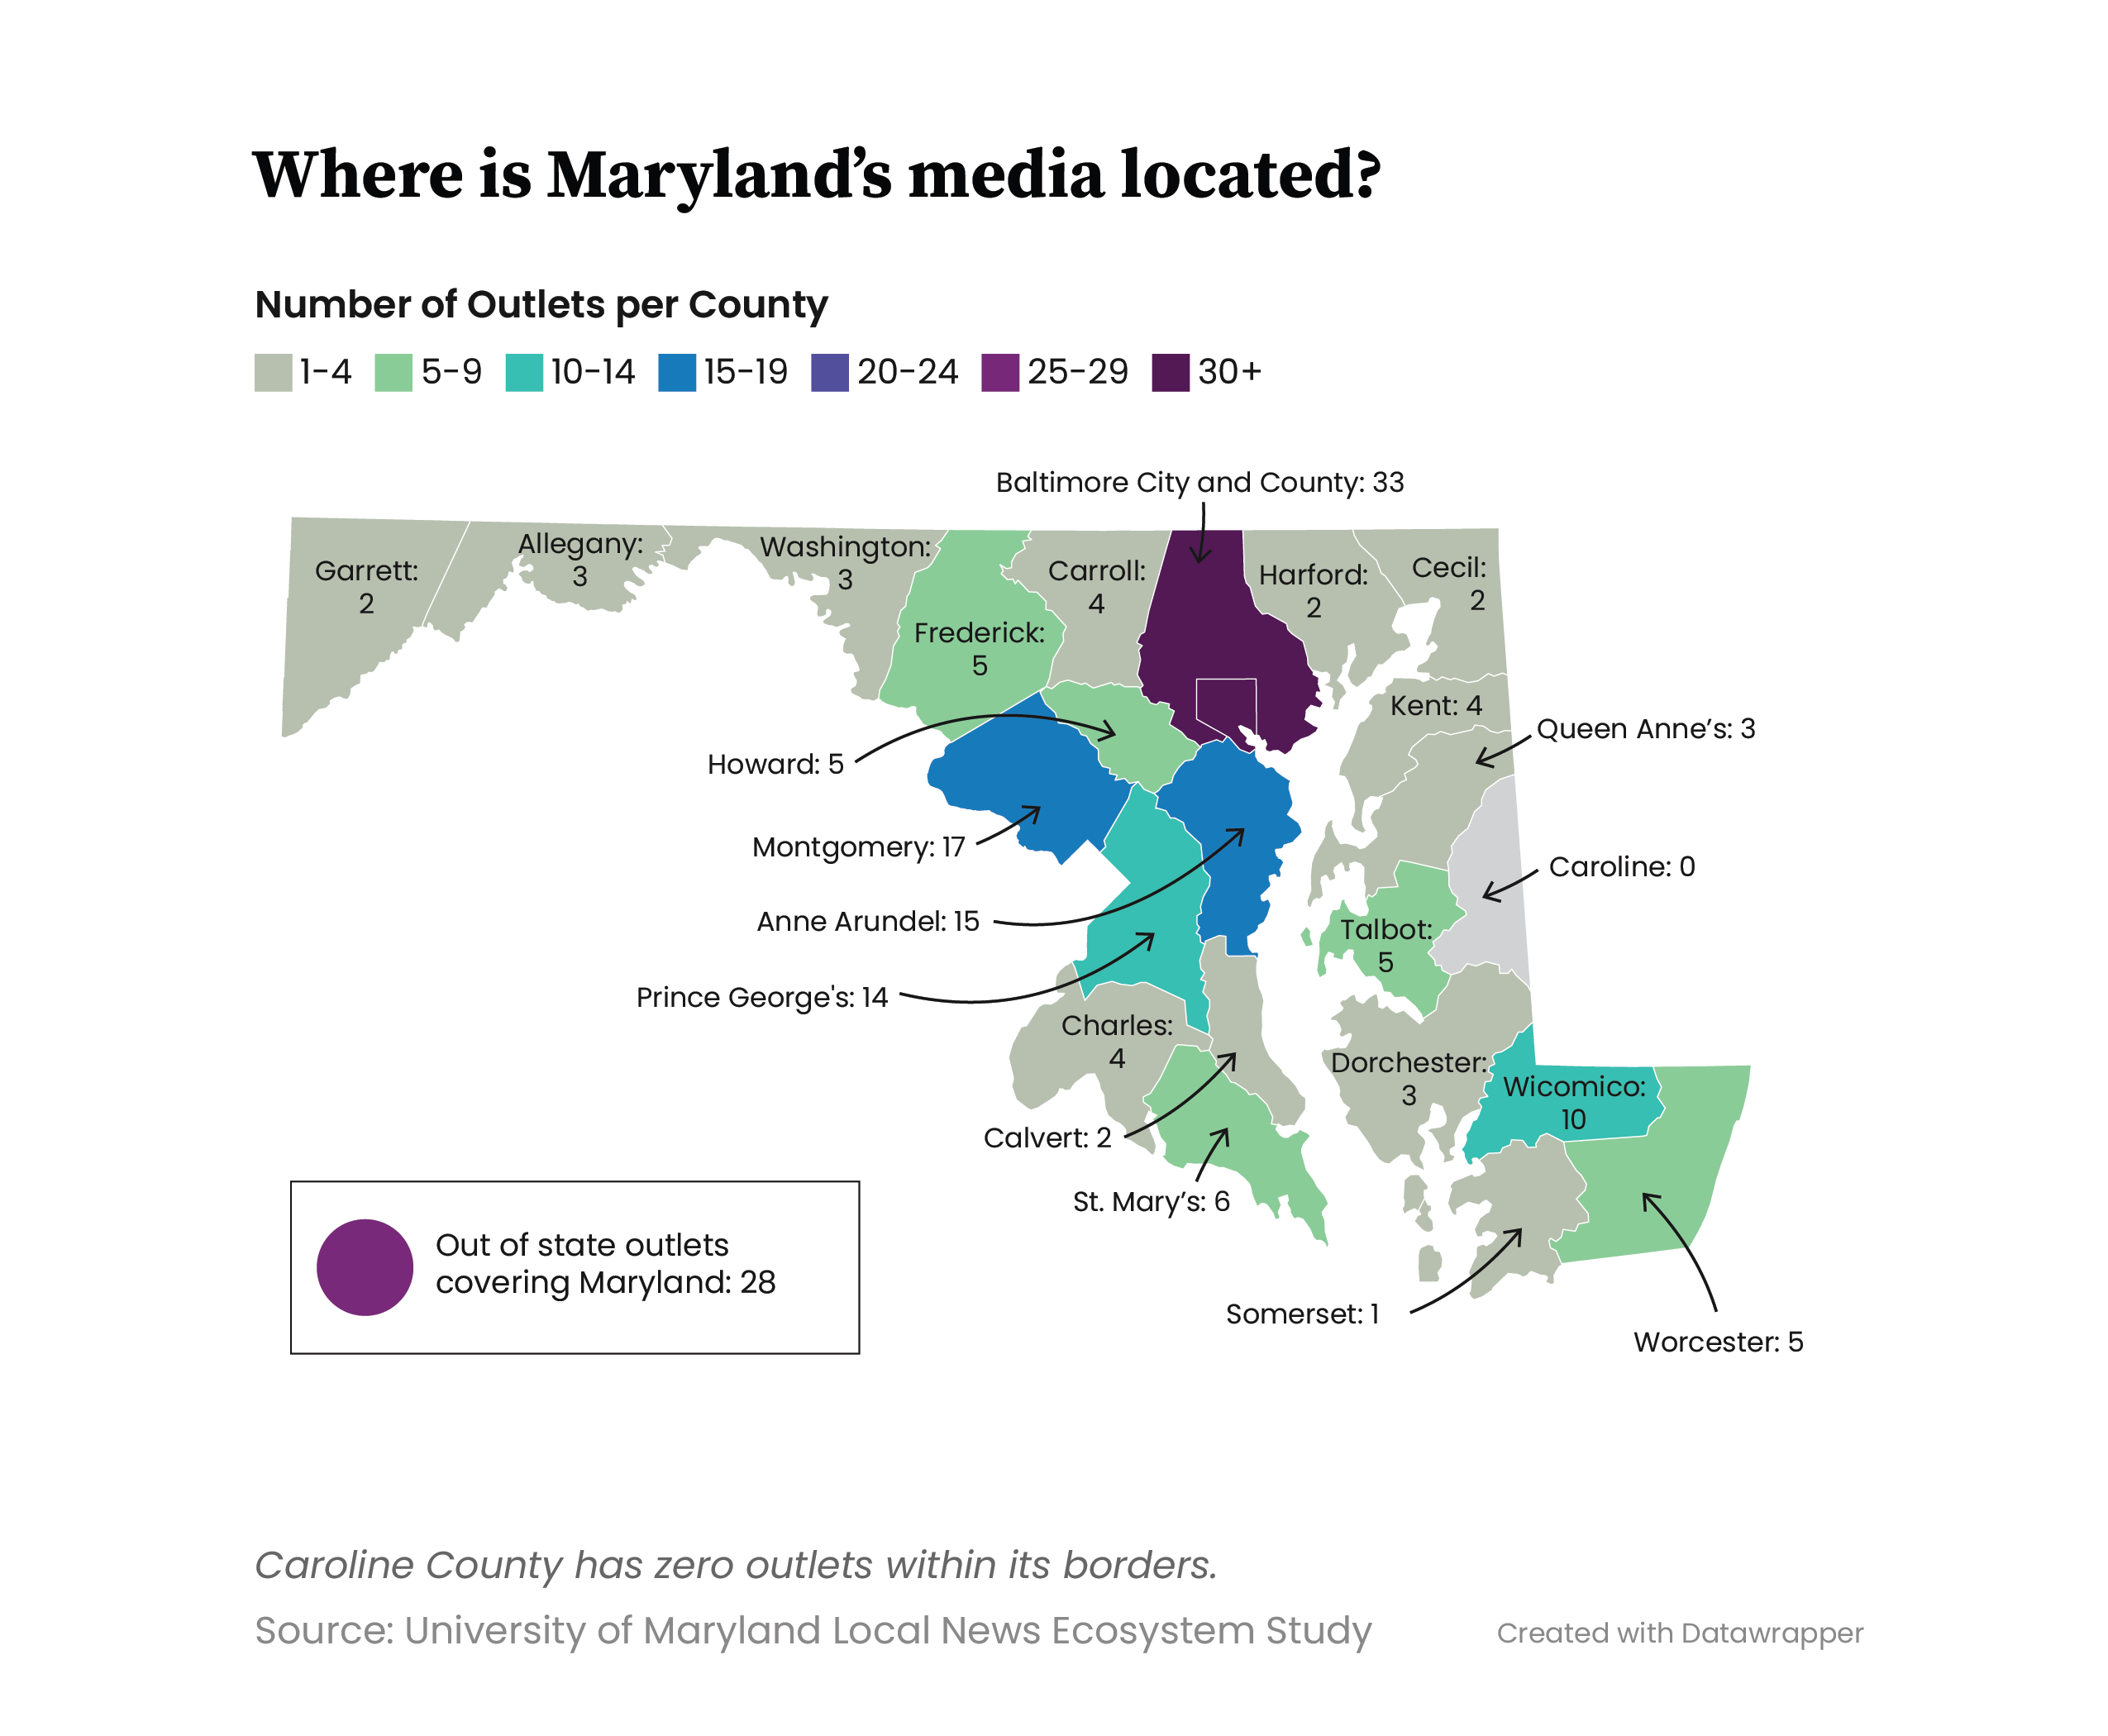 Where is Maryland's media located